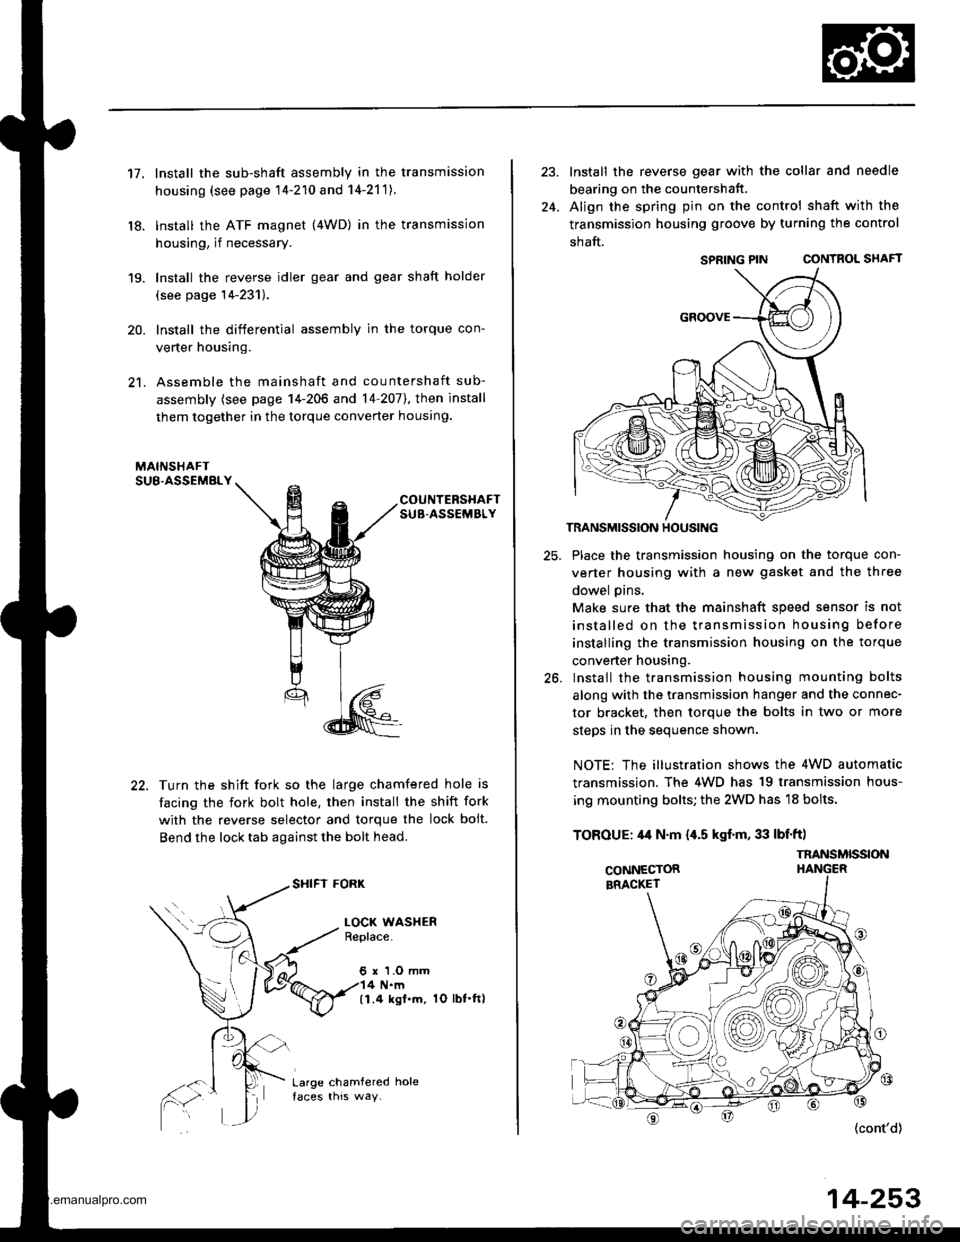 HONDA CR-V 1999 RD1-RD3 / 1.G Owners Guide 
17.
18.
19.
20.
21.
Install the sub-shaft assembly in the transmission
housing (see page 14-210 and 14-2111.
lnstall the ATF magnet (4WD) in the transmission
housing, if necessary.
Install the rever